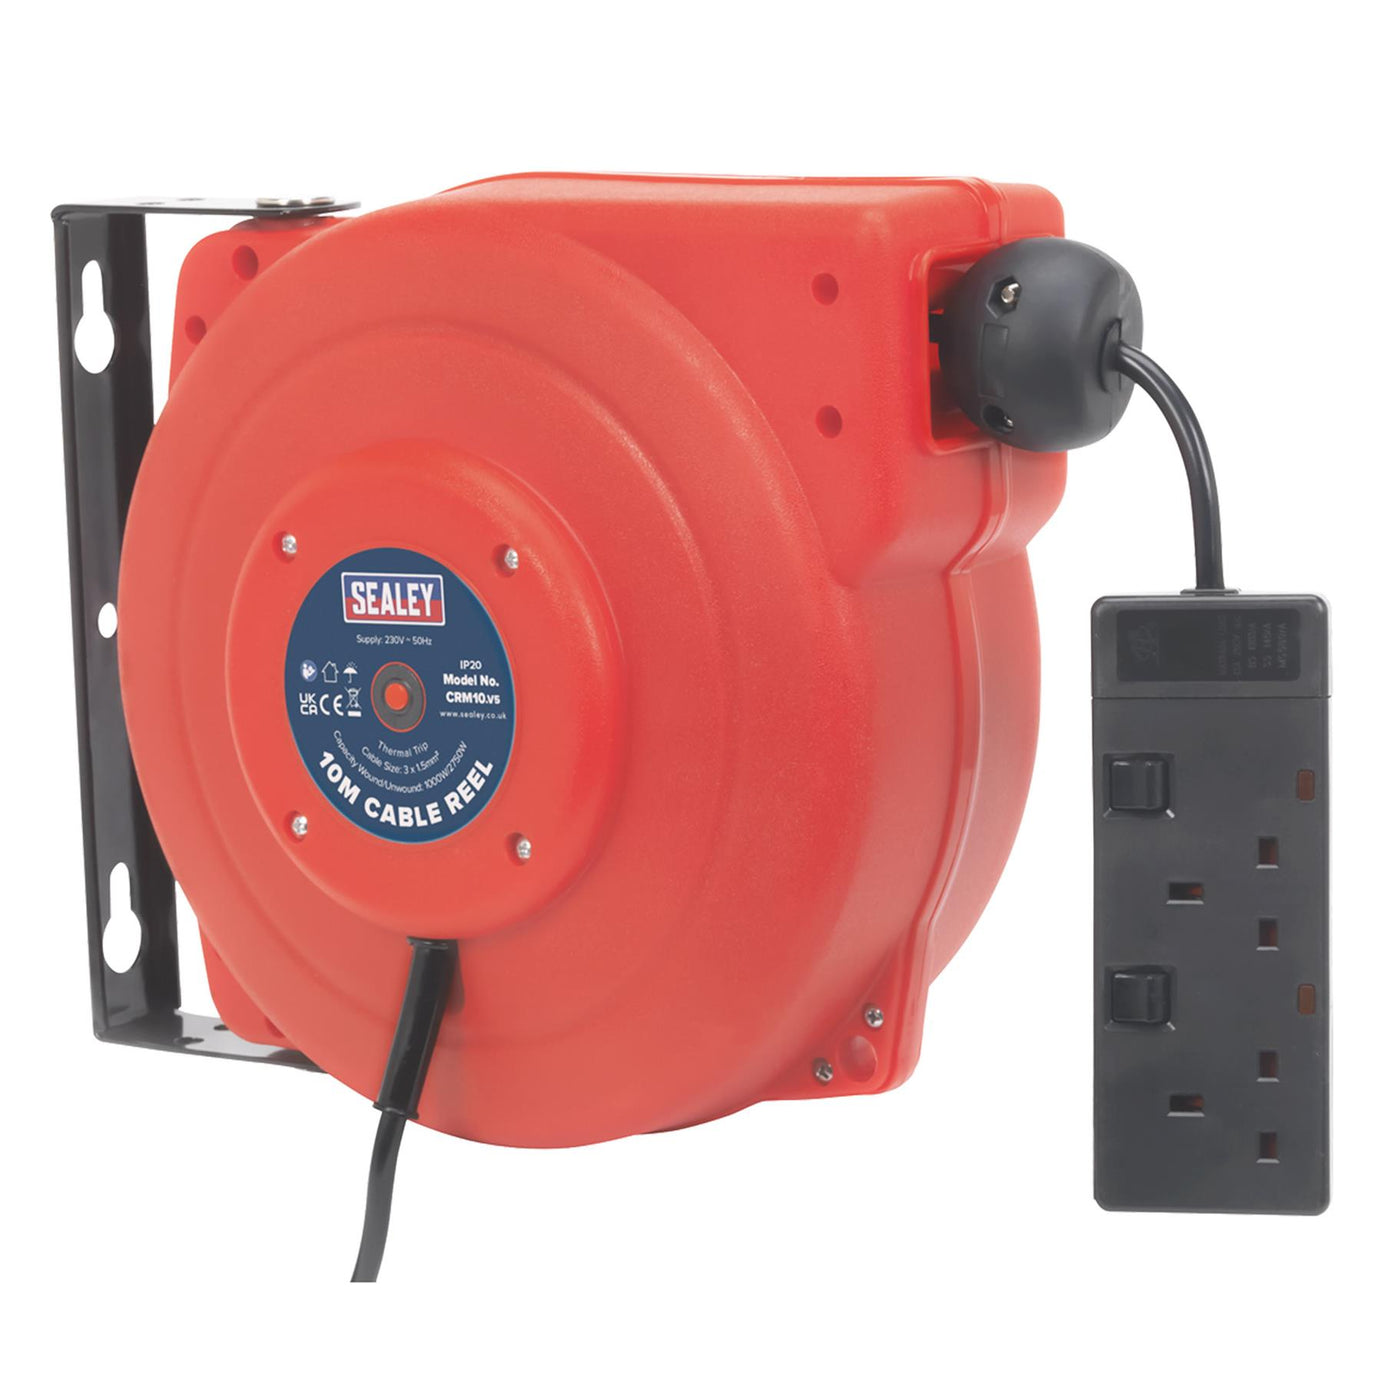 Sealey 10m Extension Cable Reel Retractable System 2 x 230V Sockets